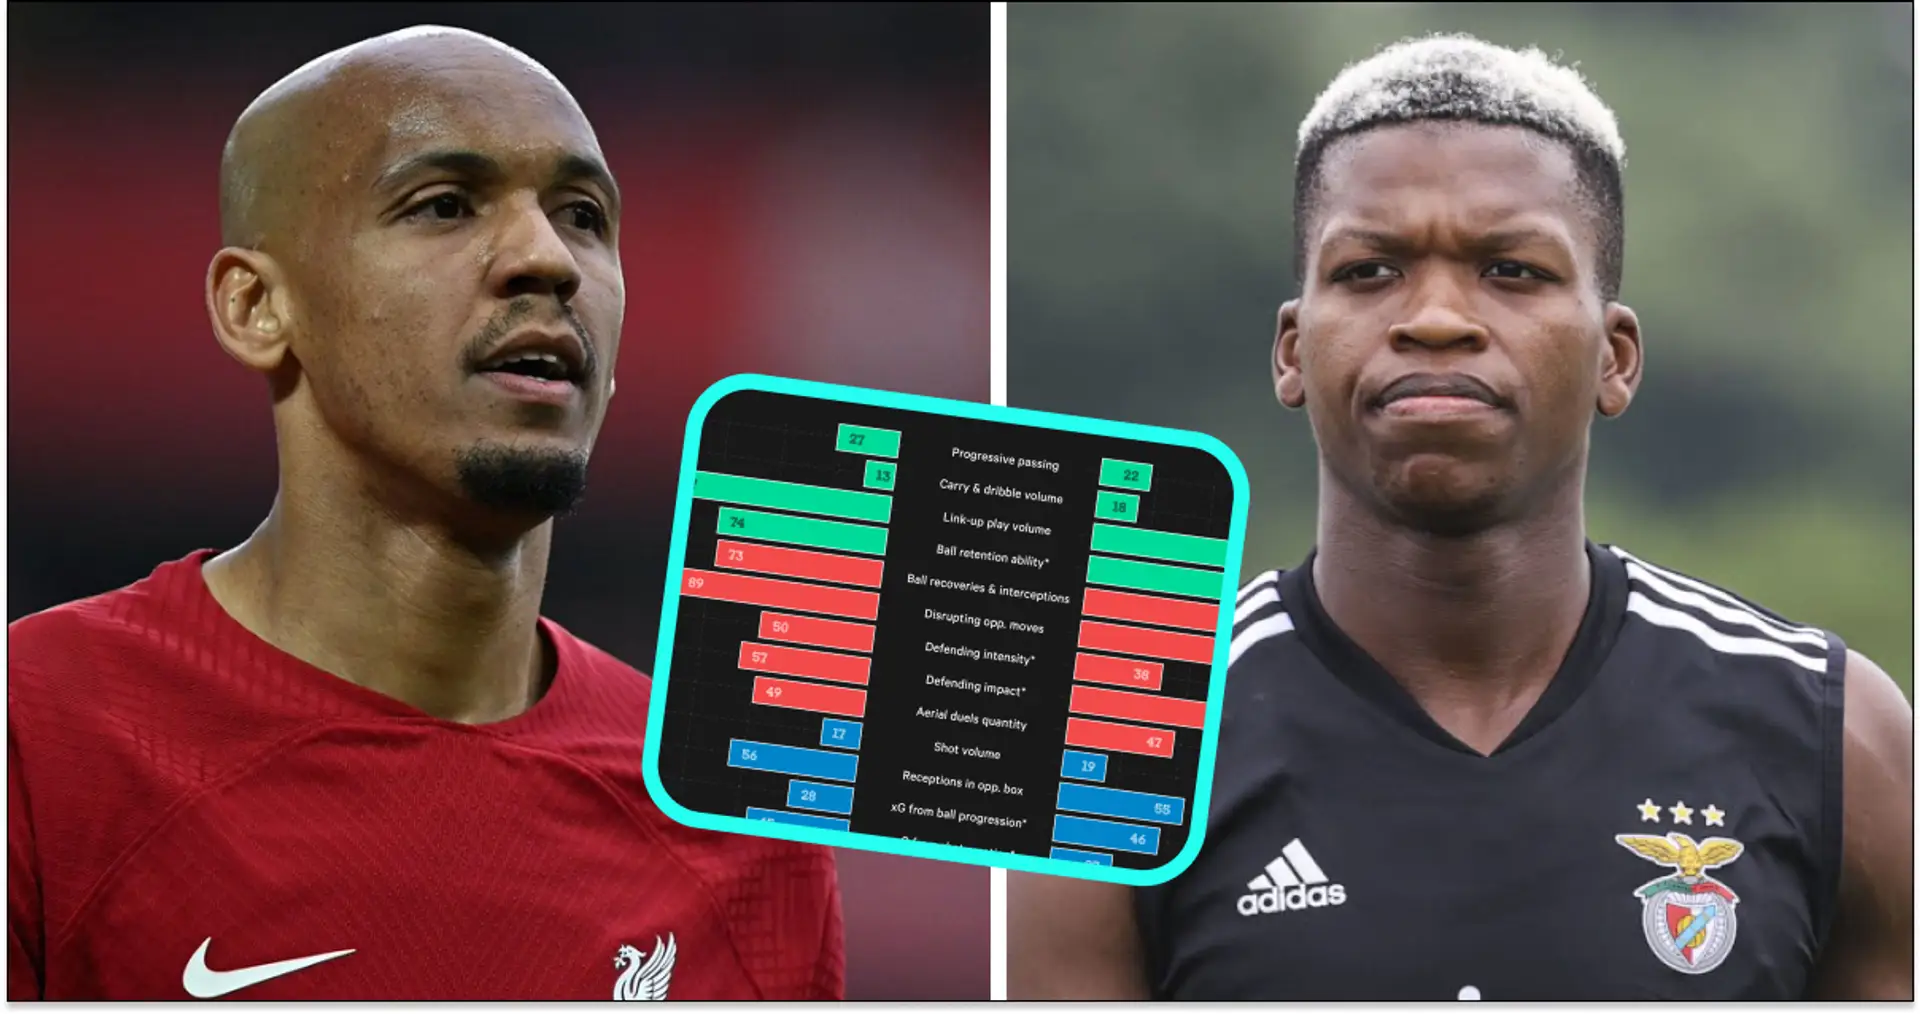 Liverpool see Benfica's Luis as potetial Fabinho replacement — his stats are similar to peak Flaco